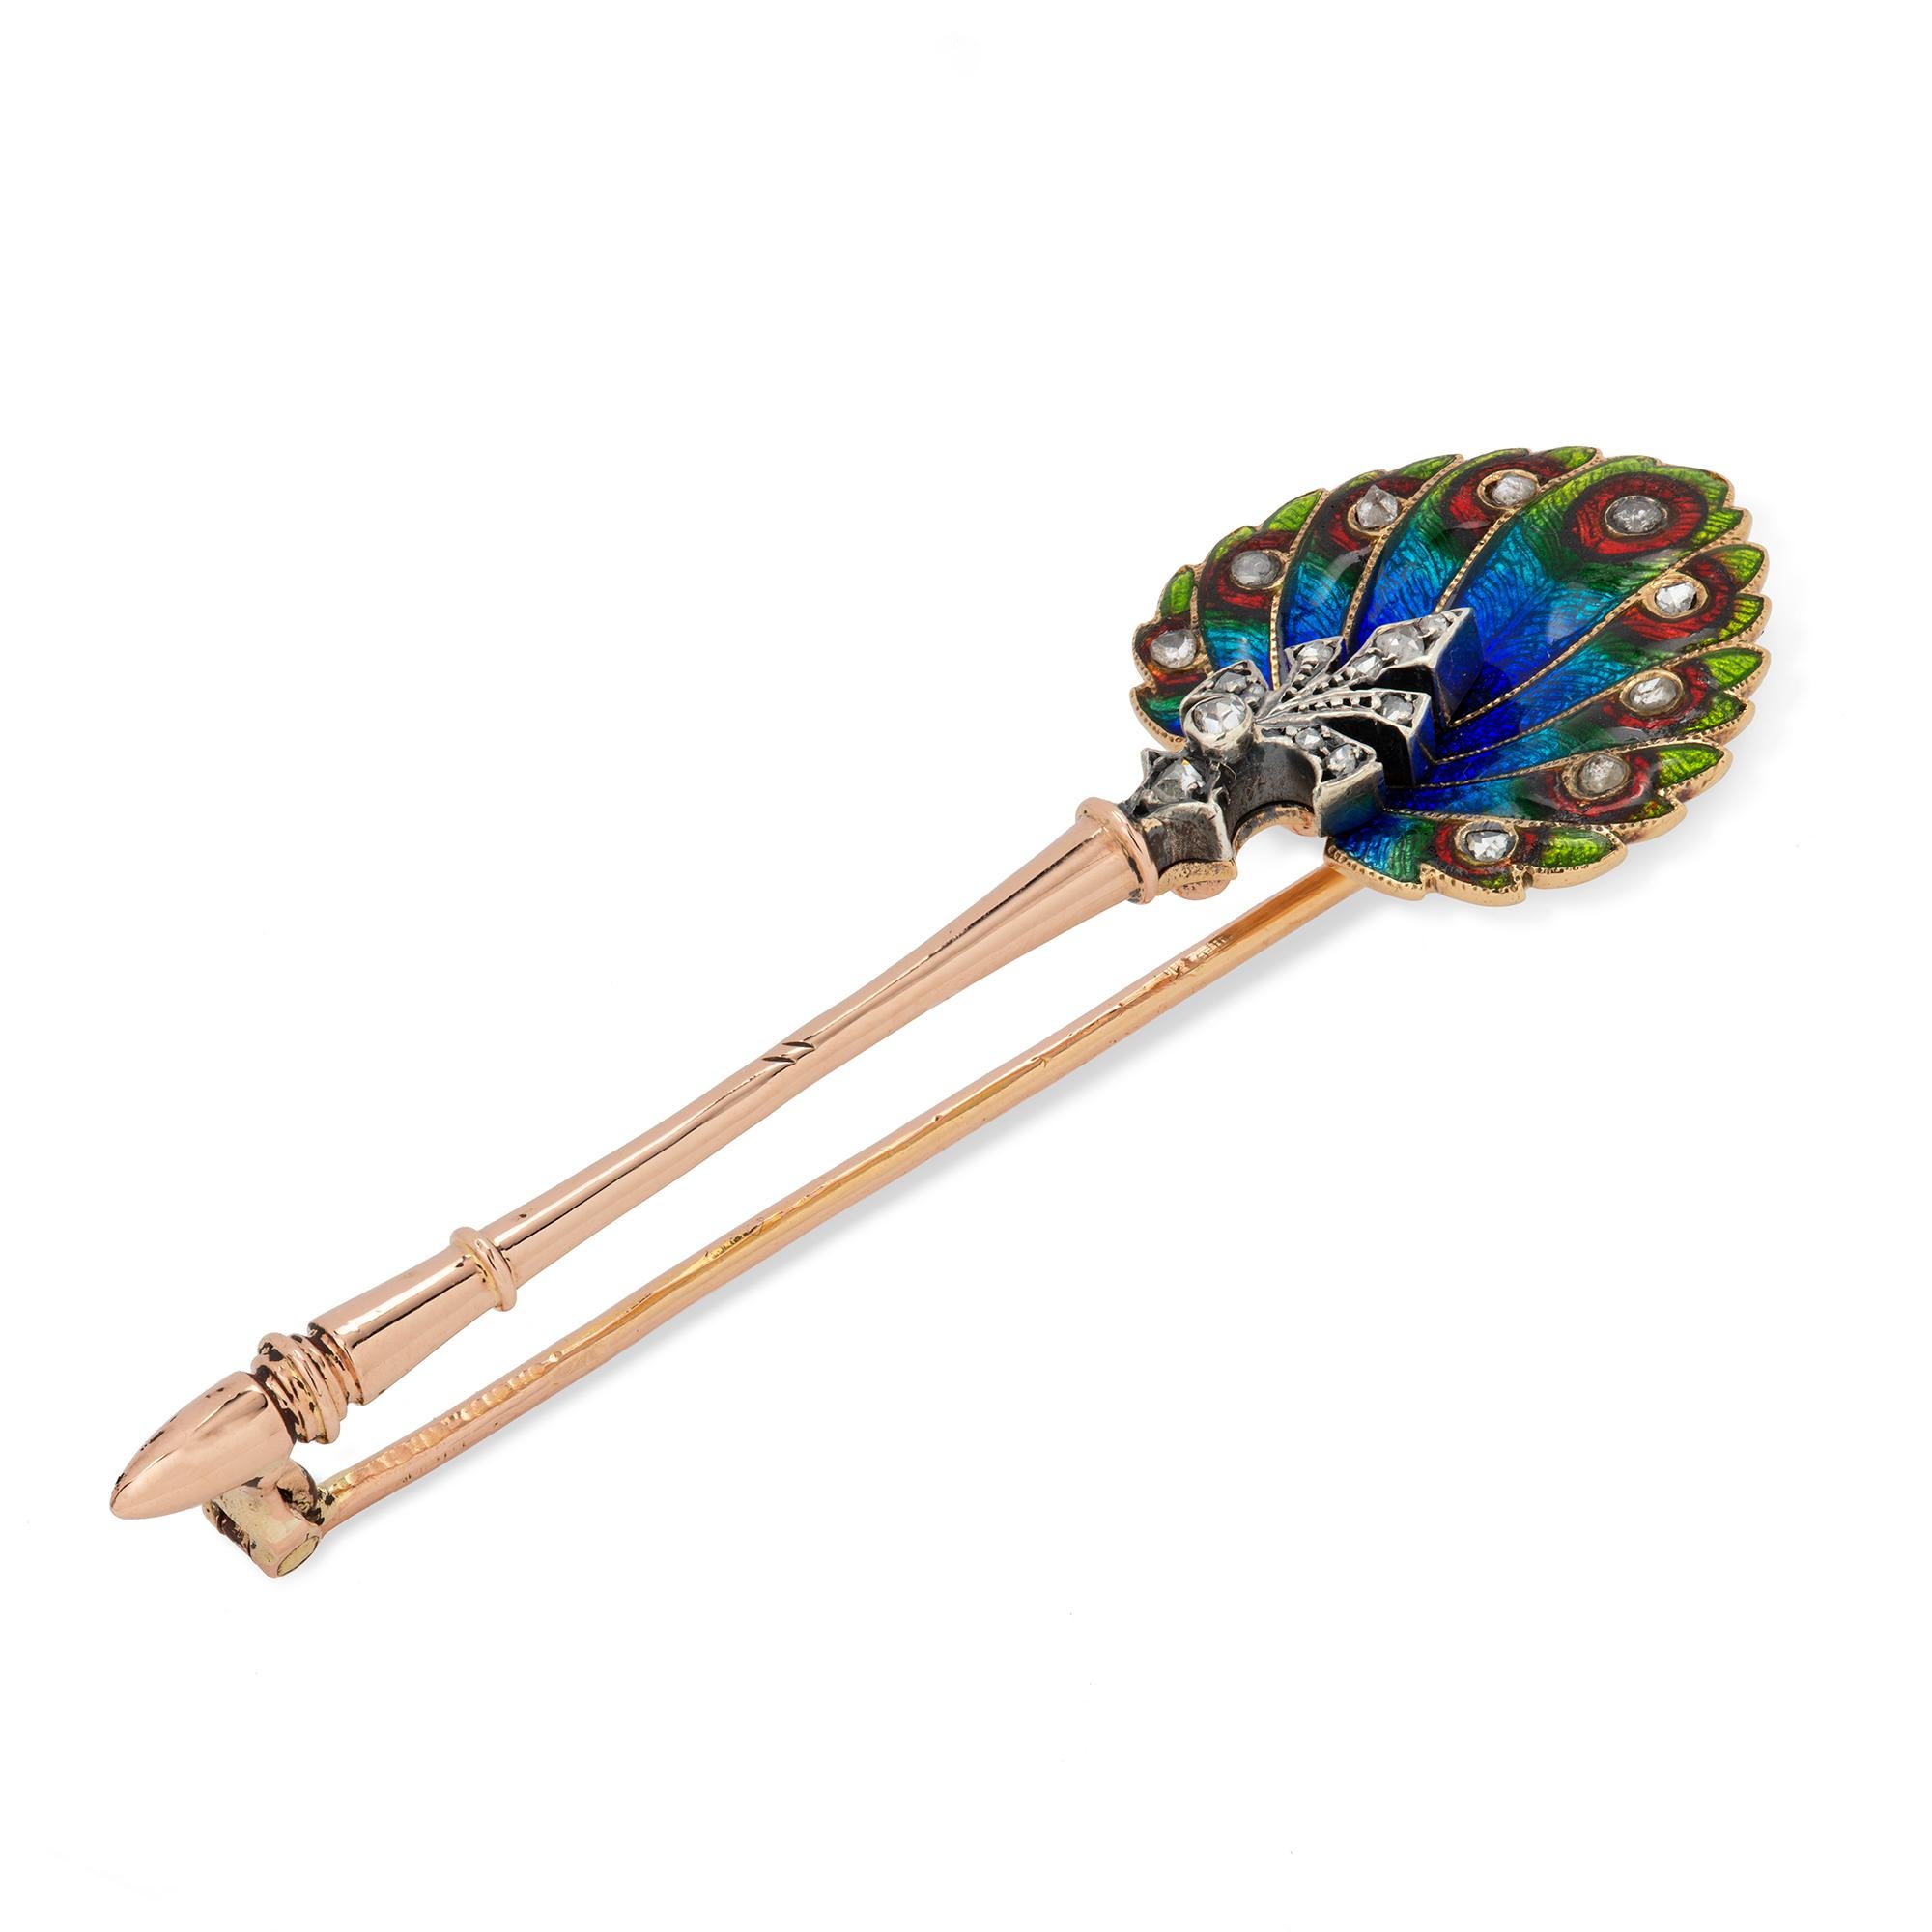 A French fin de siècle enamel and diamond peacock fan pin, consisting of nine multicolour enamelled feathers each bearing a rose-cut diamond, to a rose-cut diamond-set palmette decoration and rose-gold handle, with red gold brooch fitting, bearing